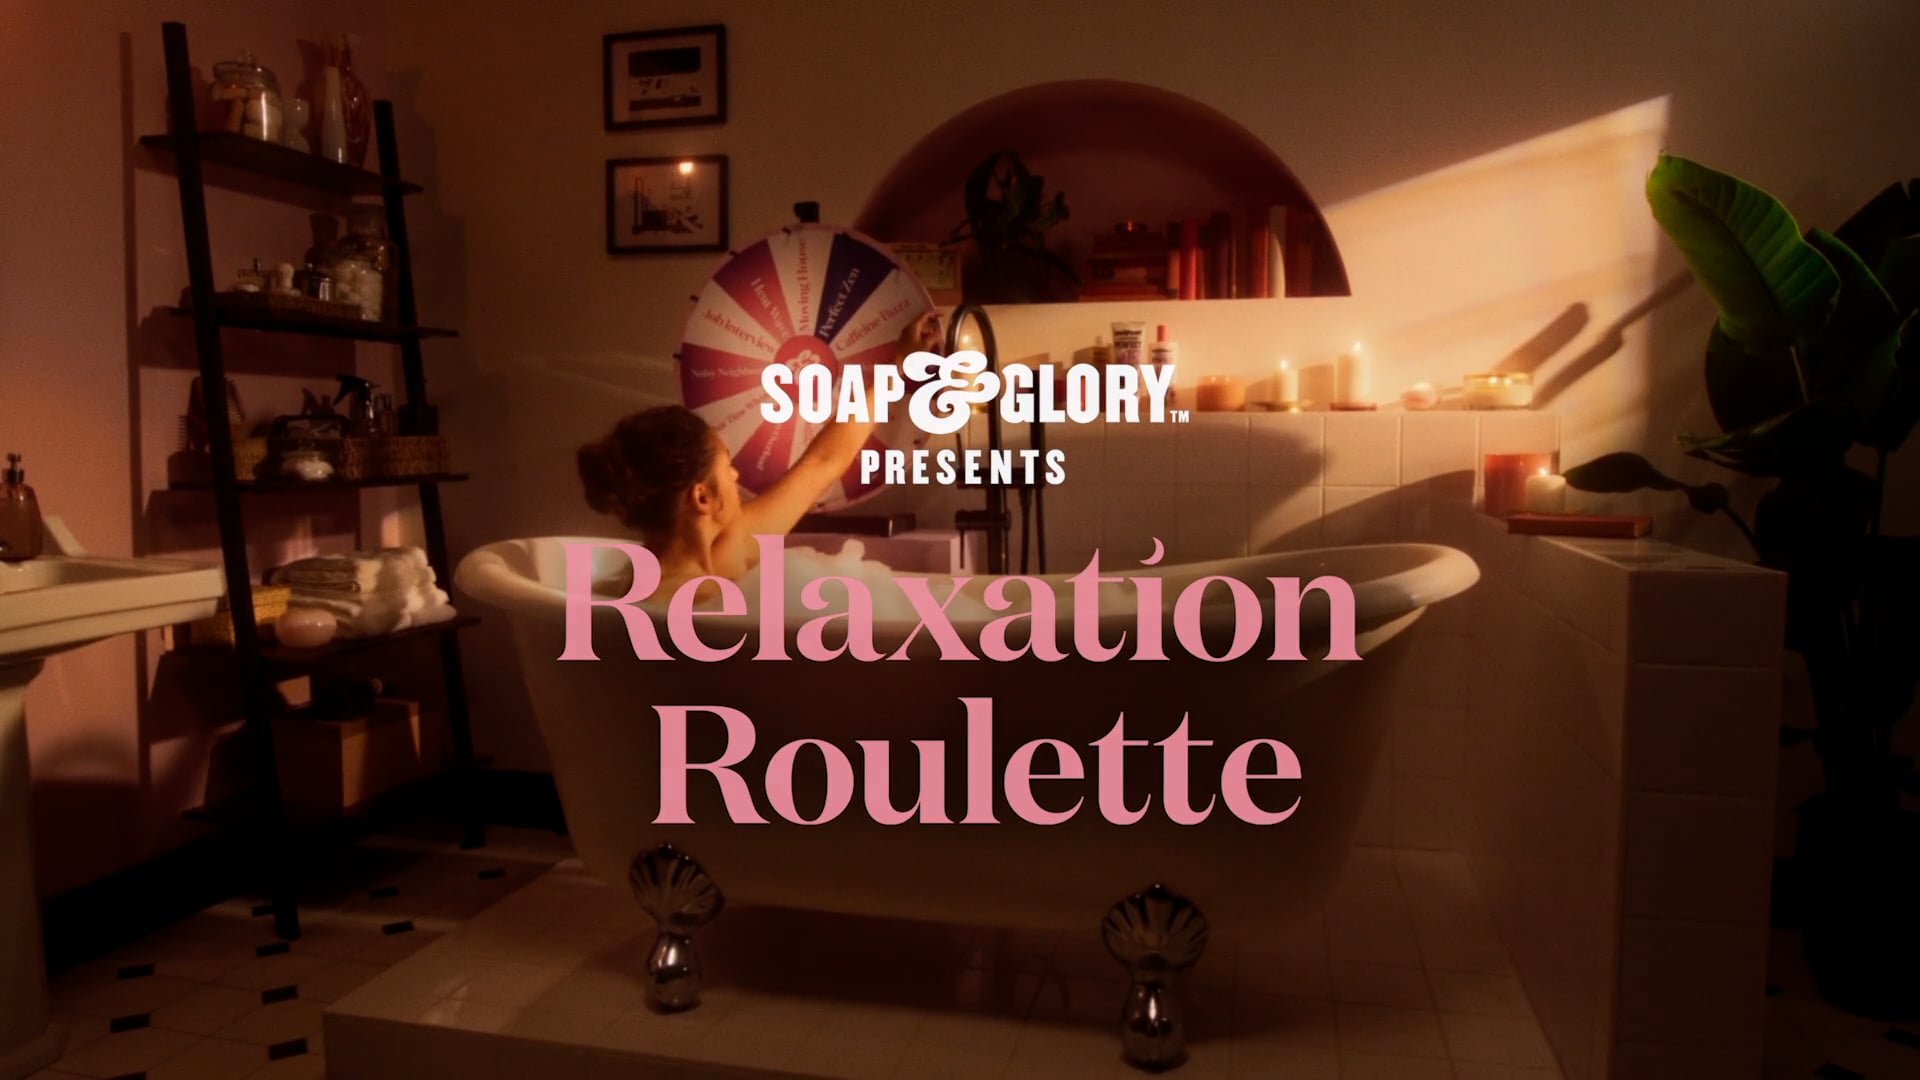 Relaxation Roulette - Soap & Glory